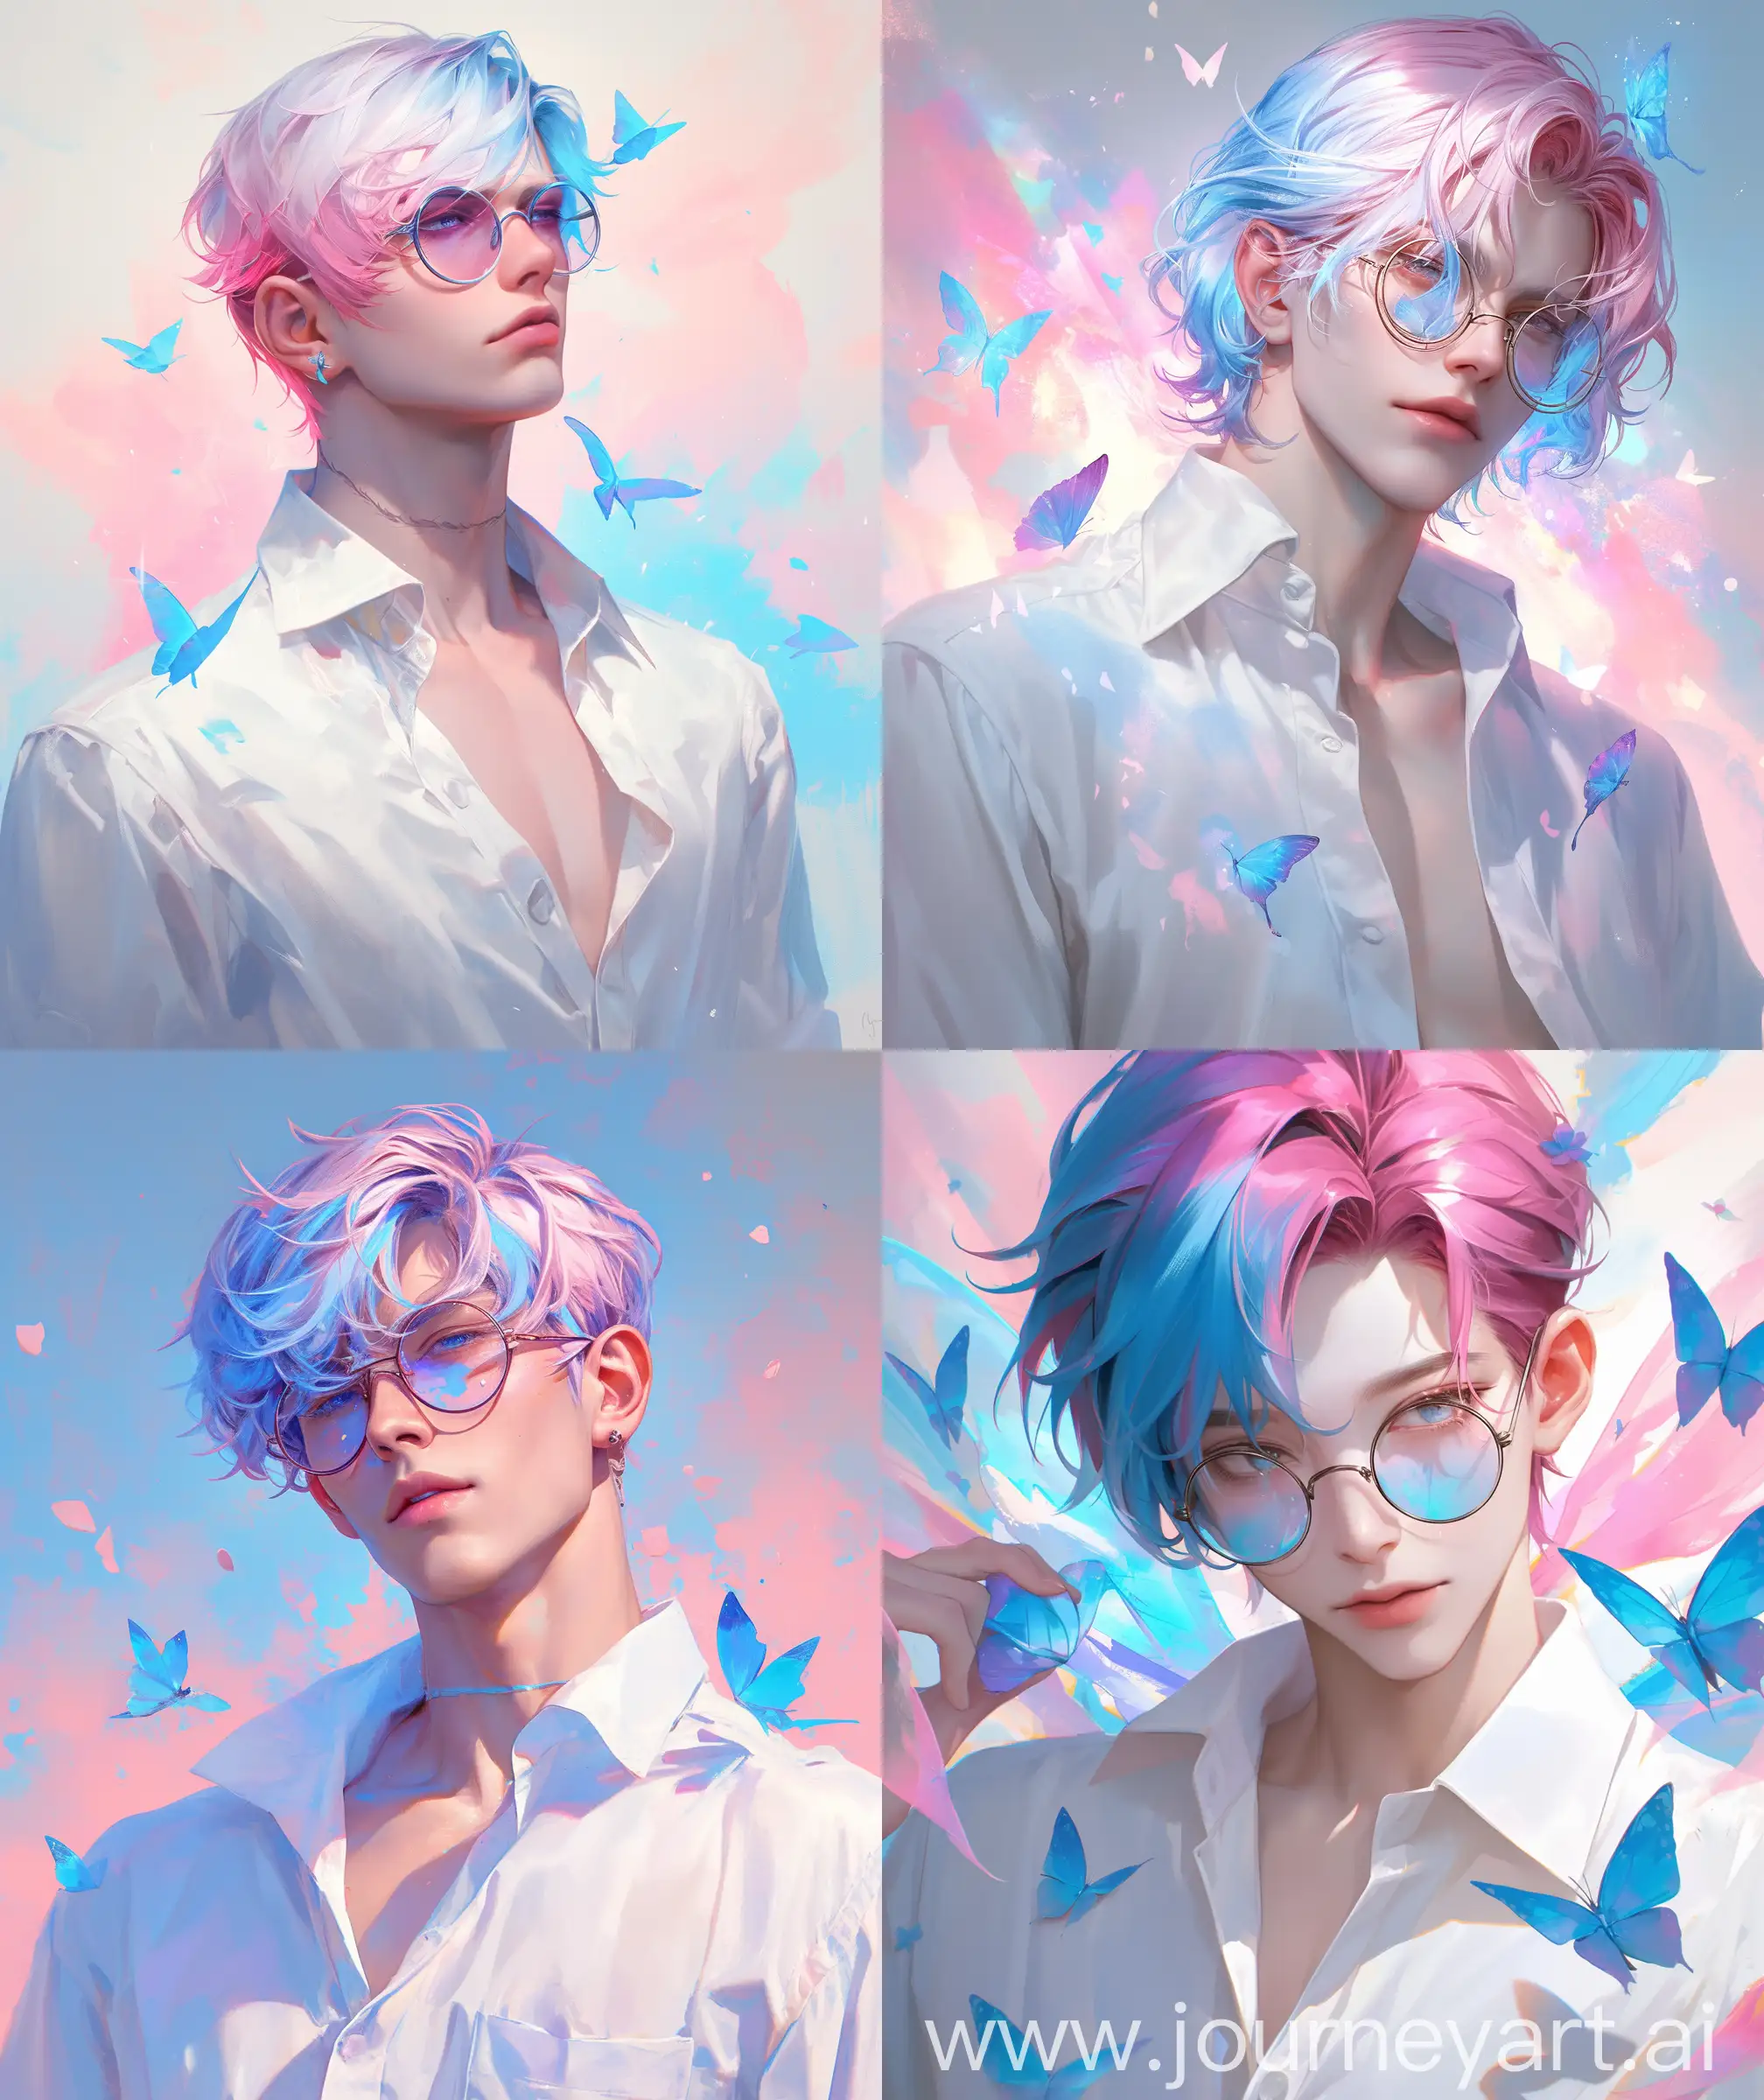 Handsome-Male-Fantasy-Character-Portrait-with-Pink-and-Blue-Hair-and-Butterflies